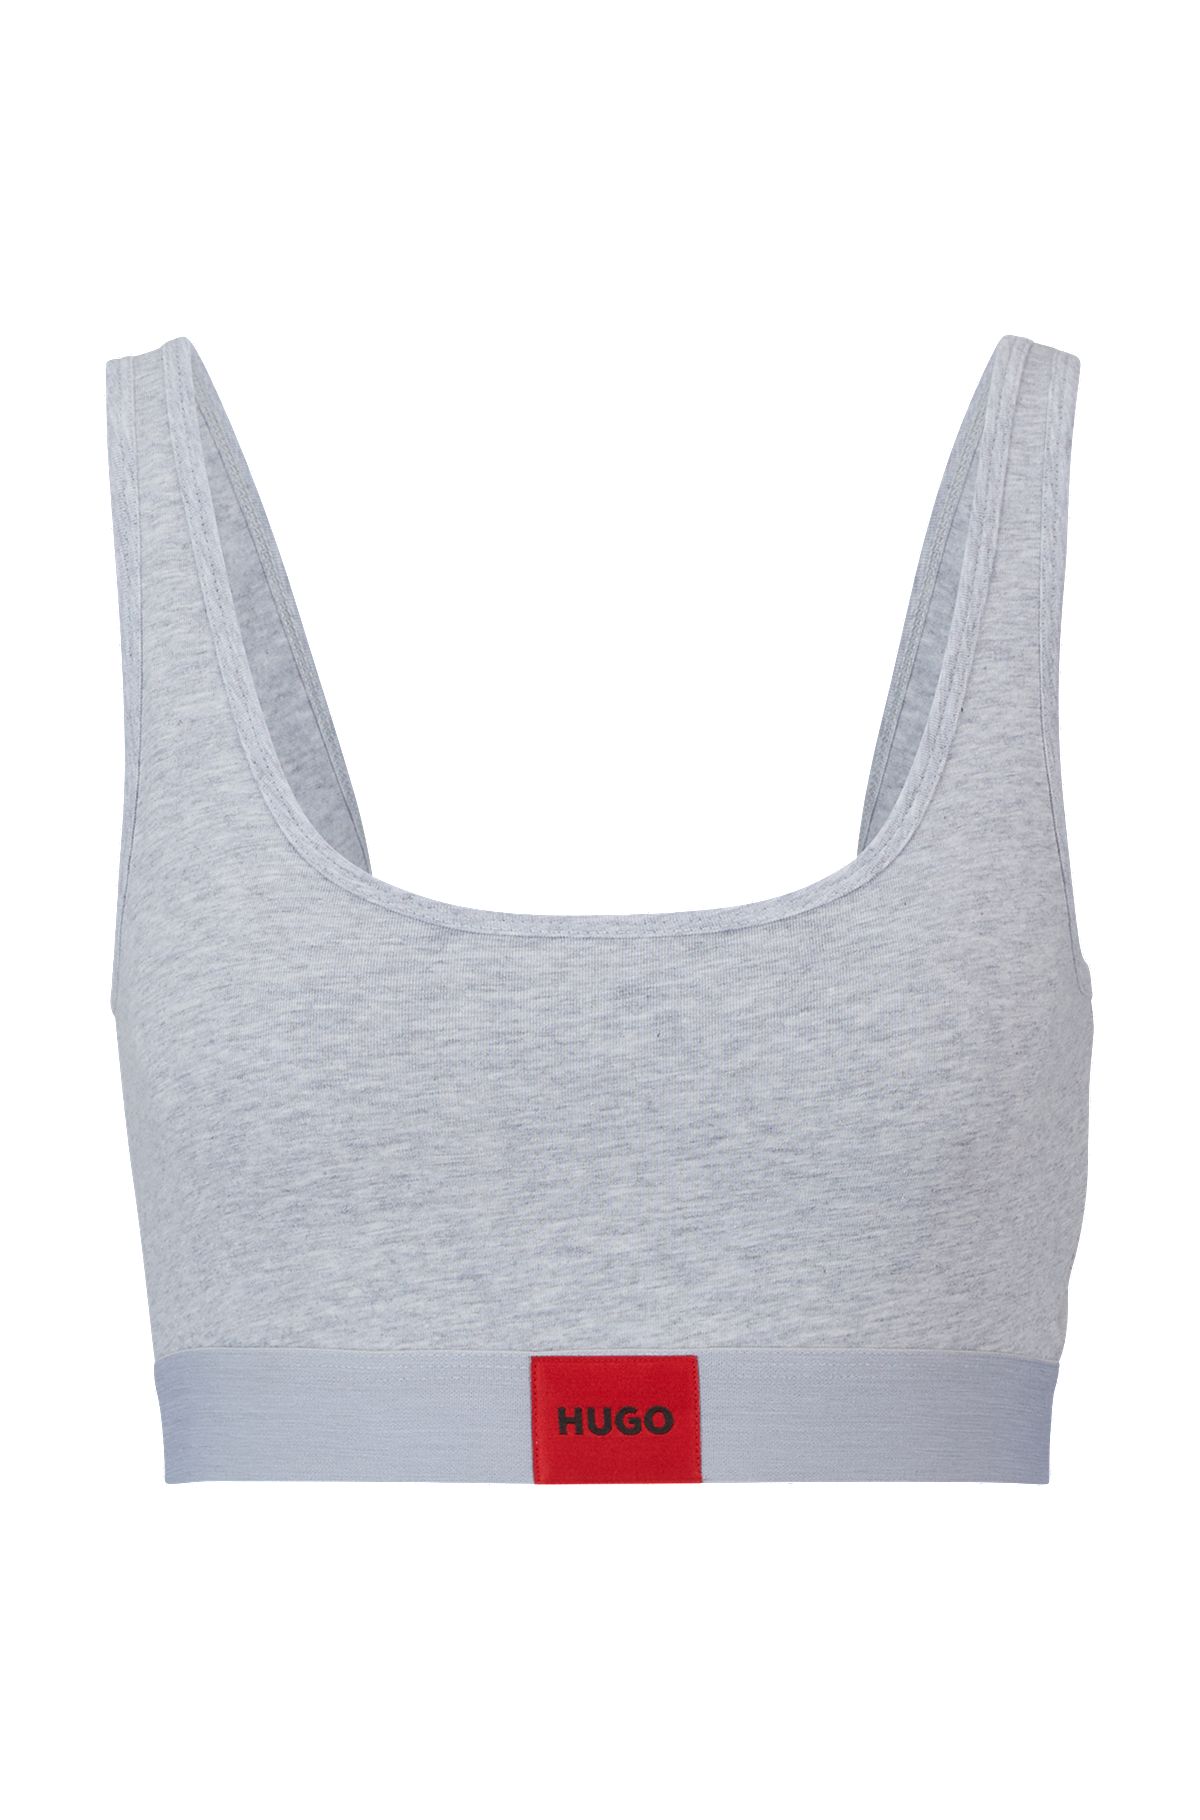 red logo HUGO Stretch-cotton bralette - label with